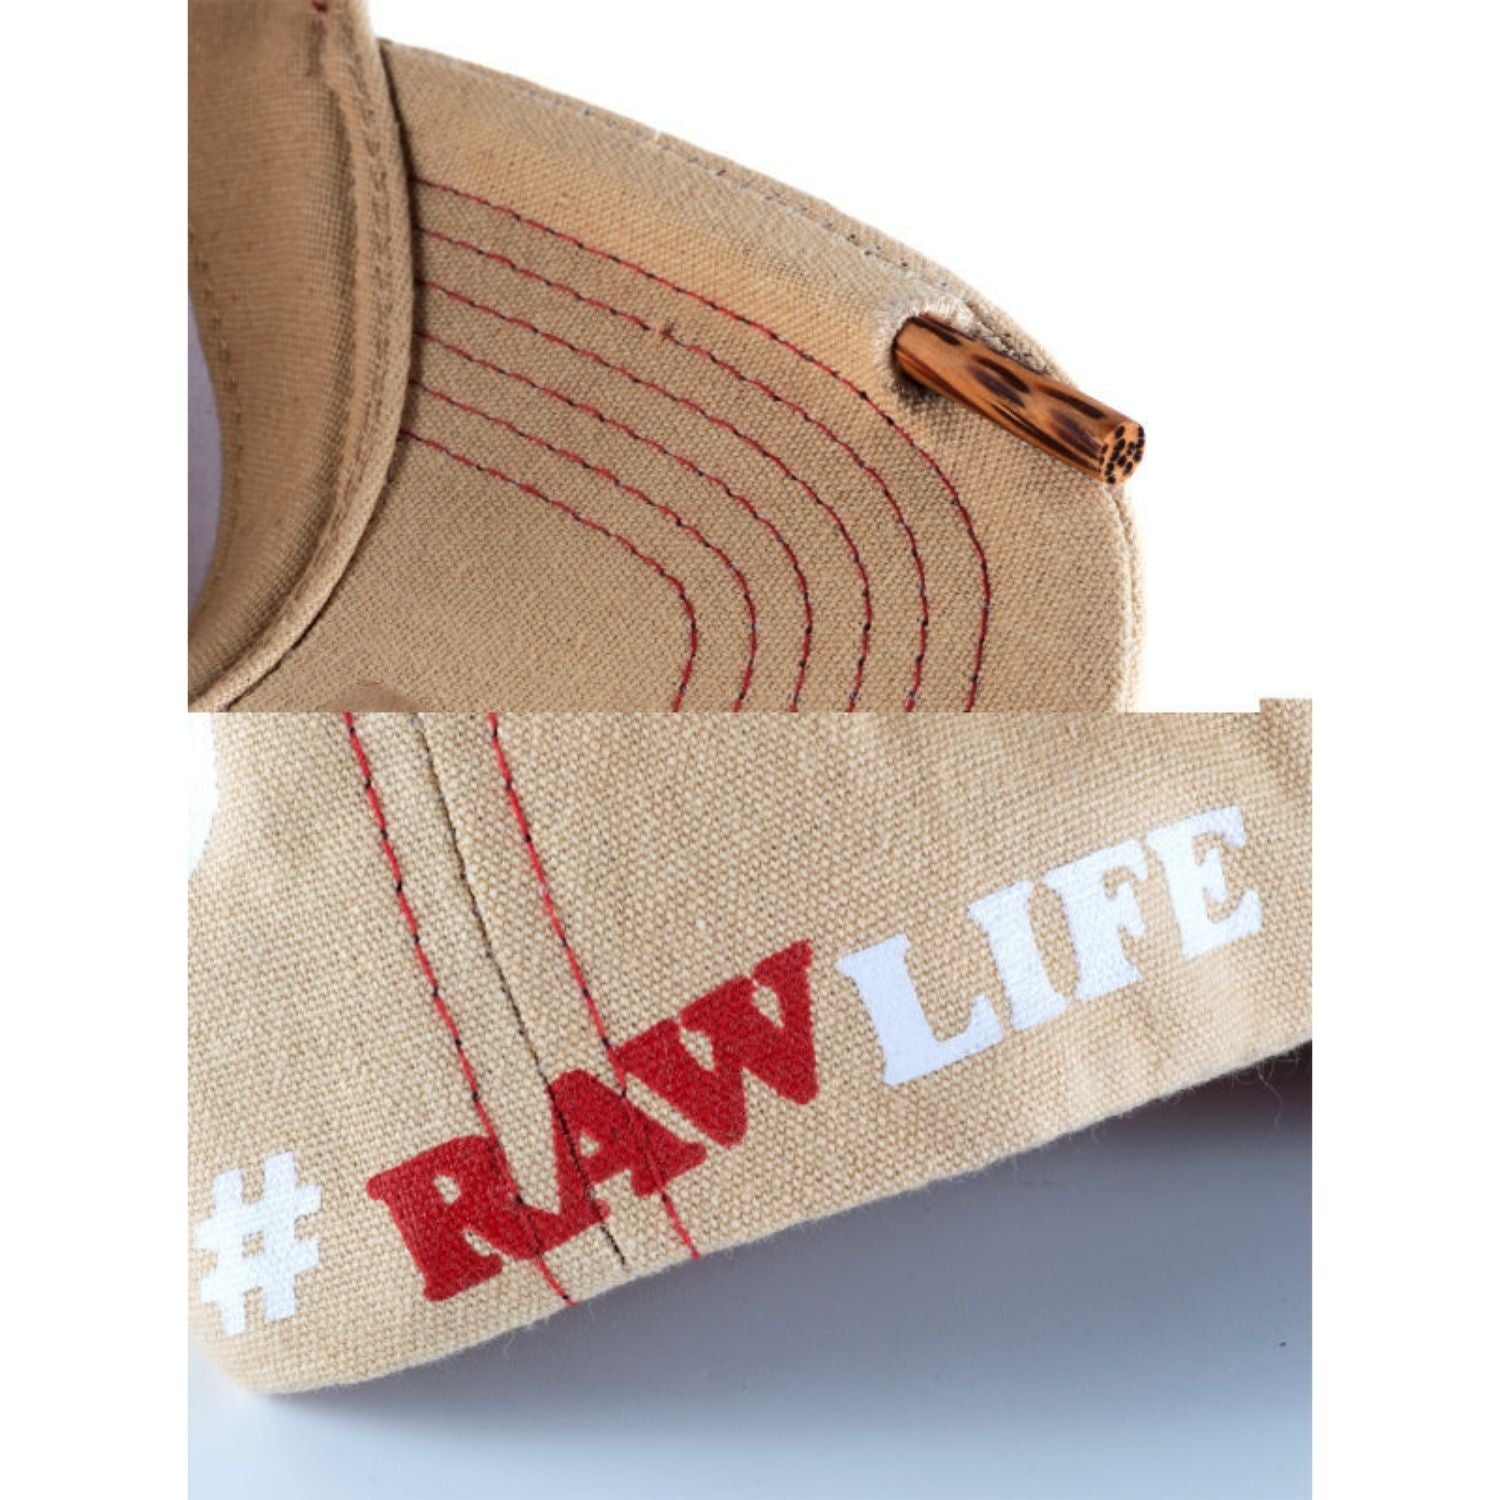 RAW Dope Poker Hat - Tan Color